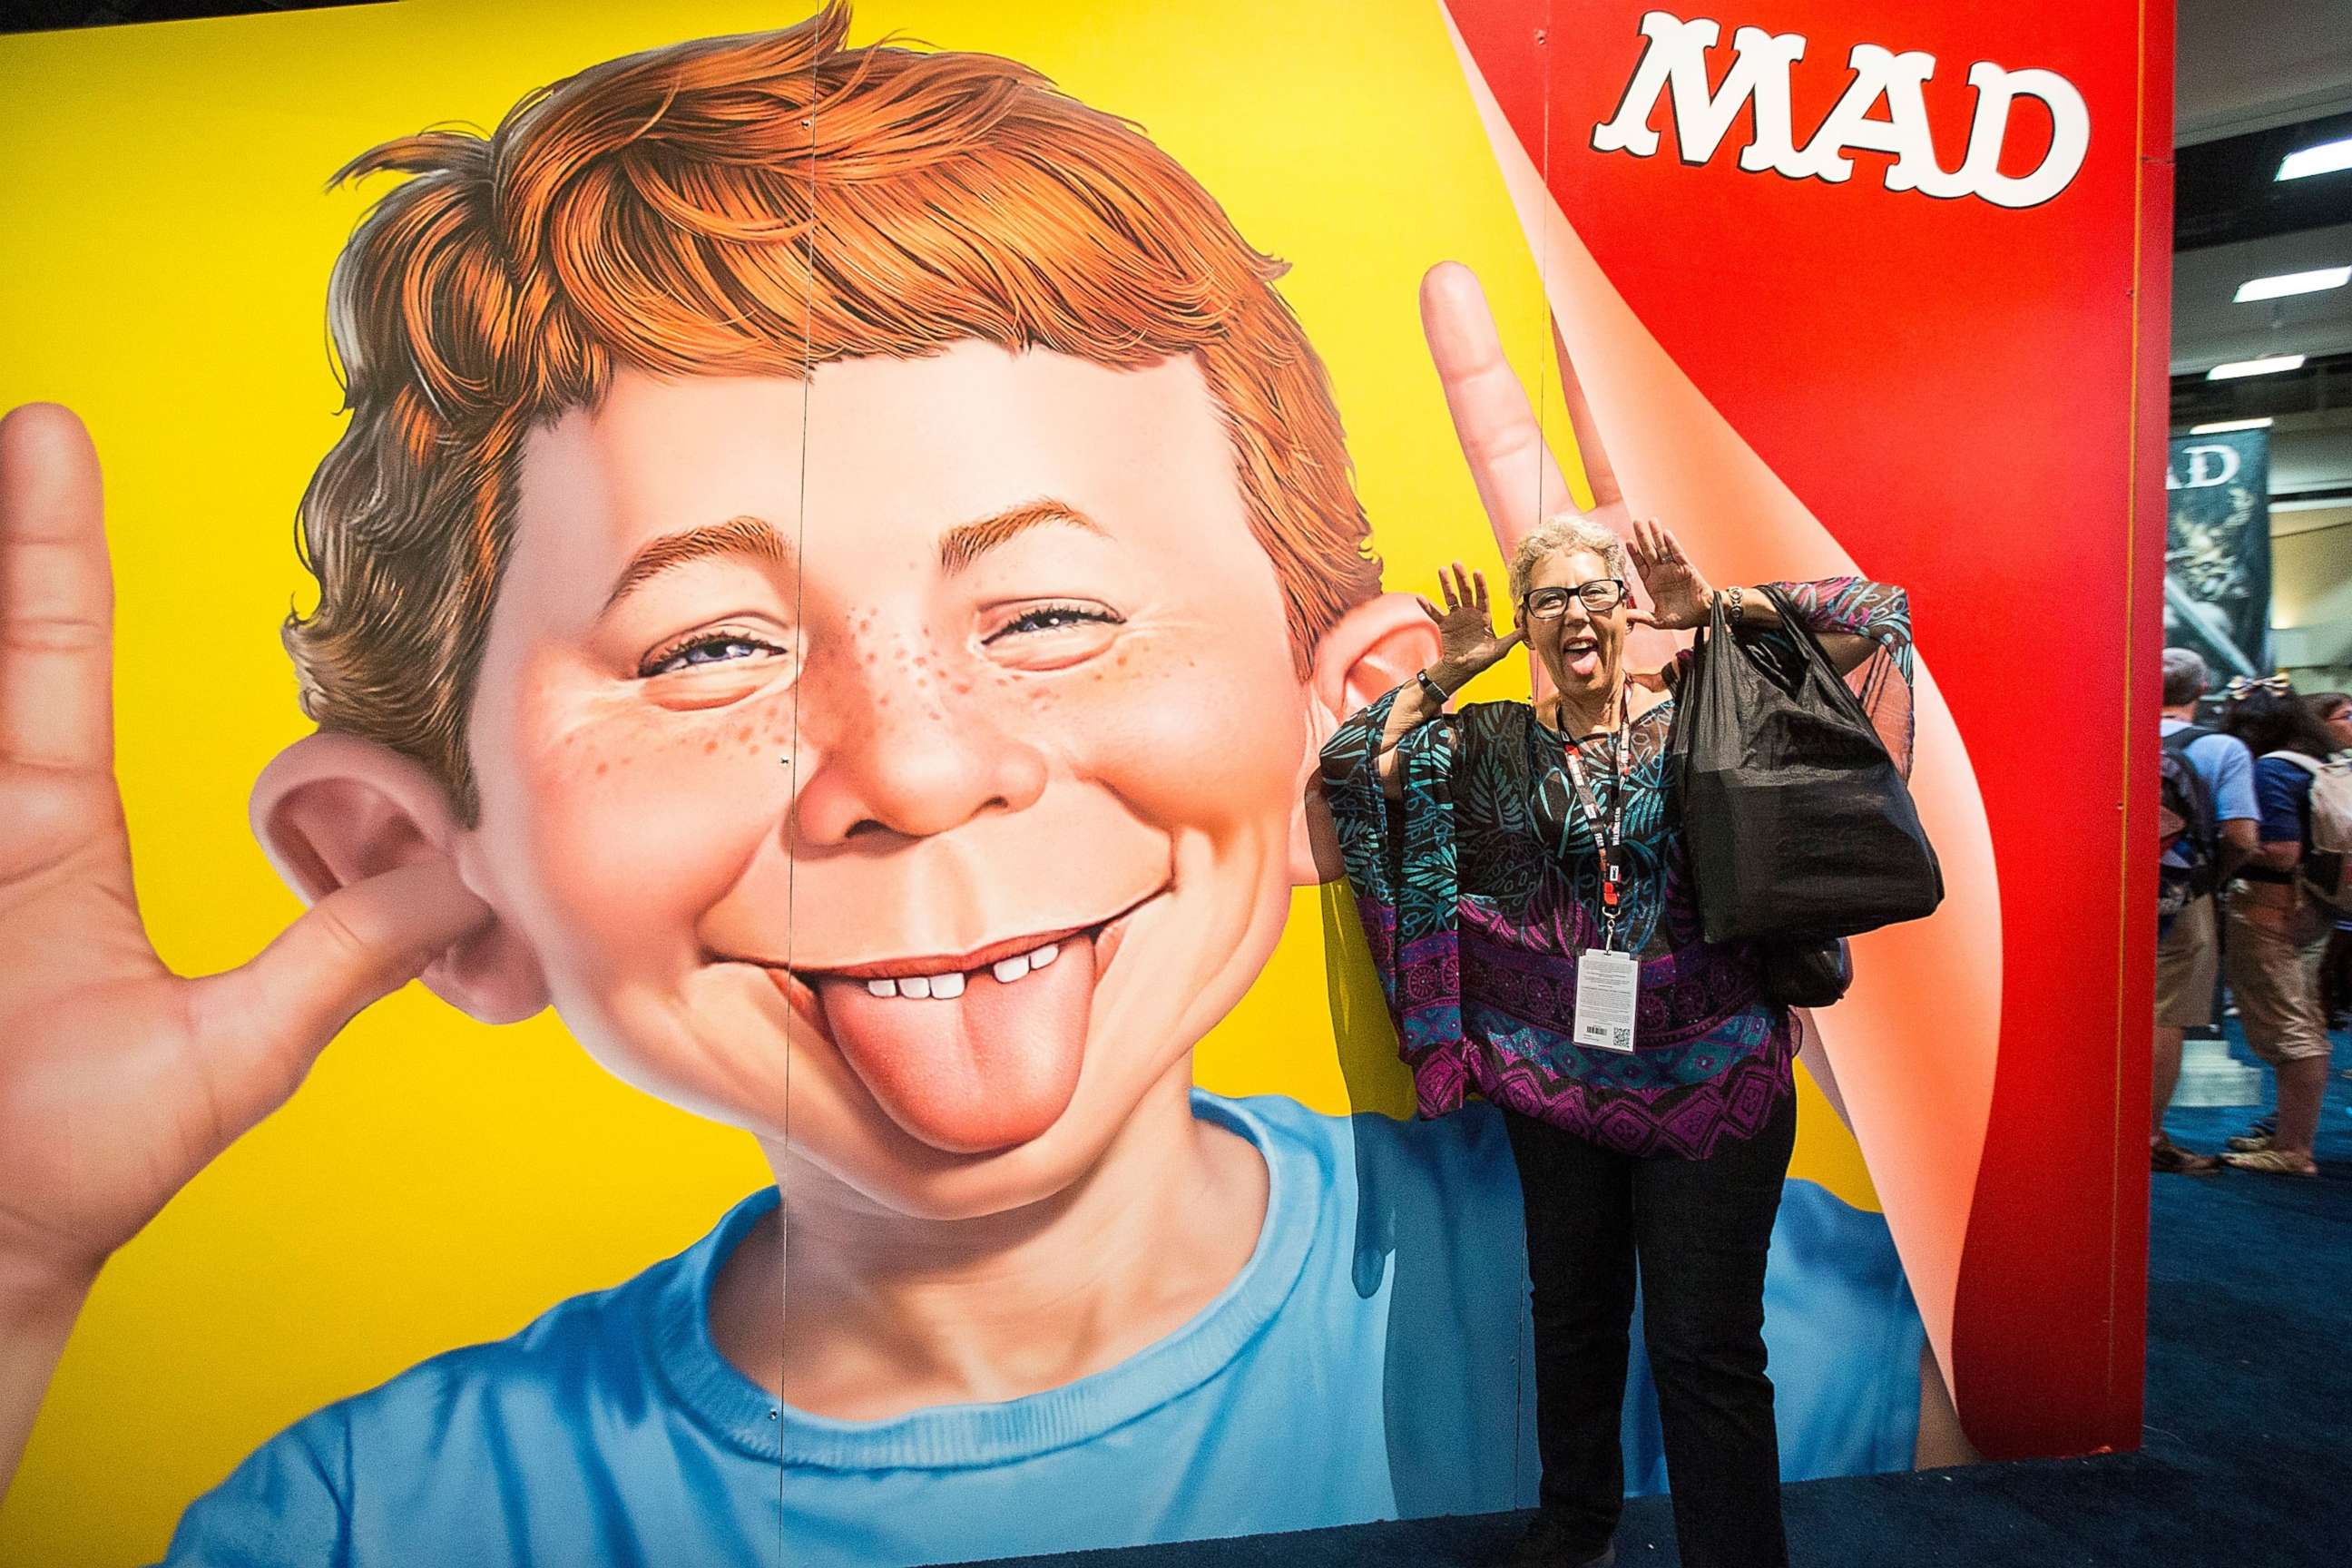 PHOTO: Attendee Judith Hawkins poses next to a display at the Mad Magazine booth at Comic-Con Preview Night on July 20, 2016 in San Diego, California.